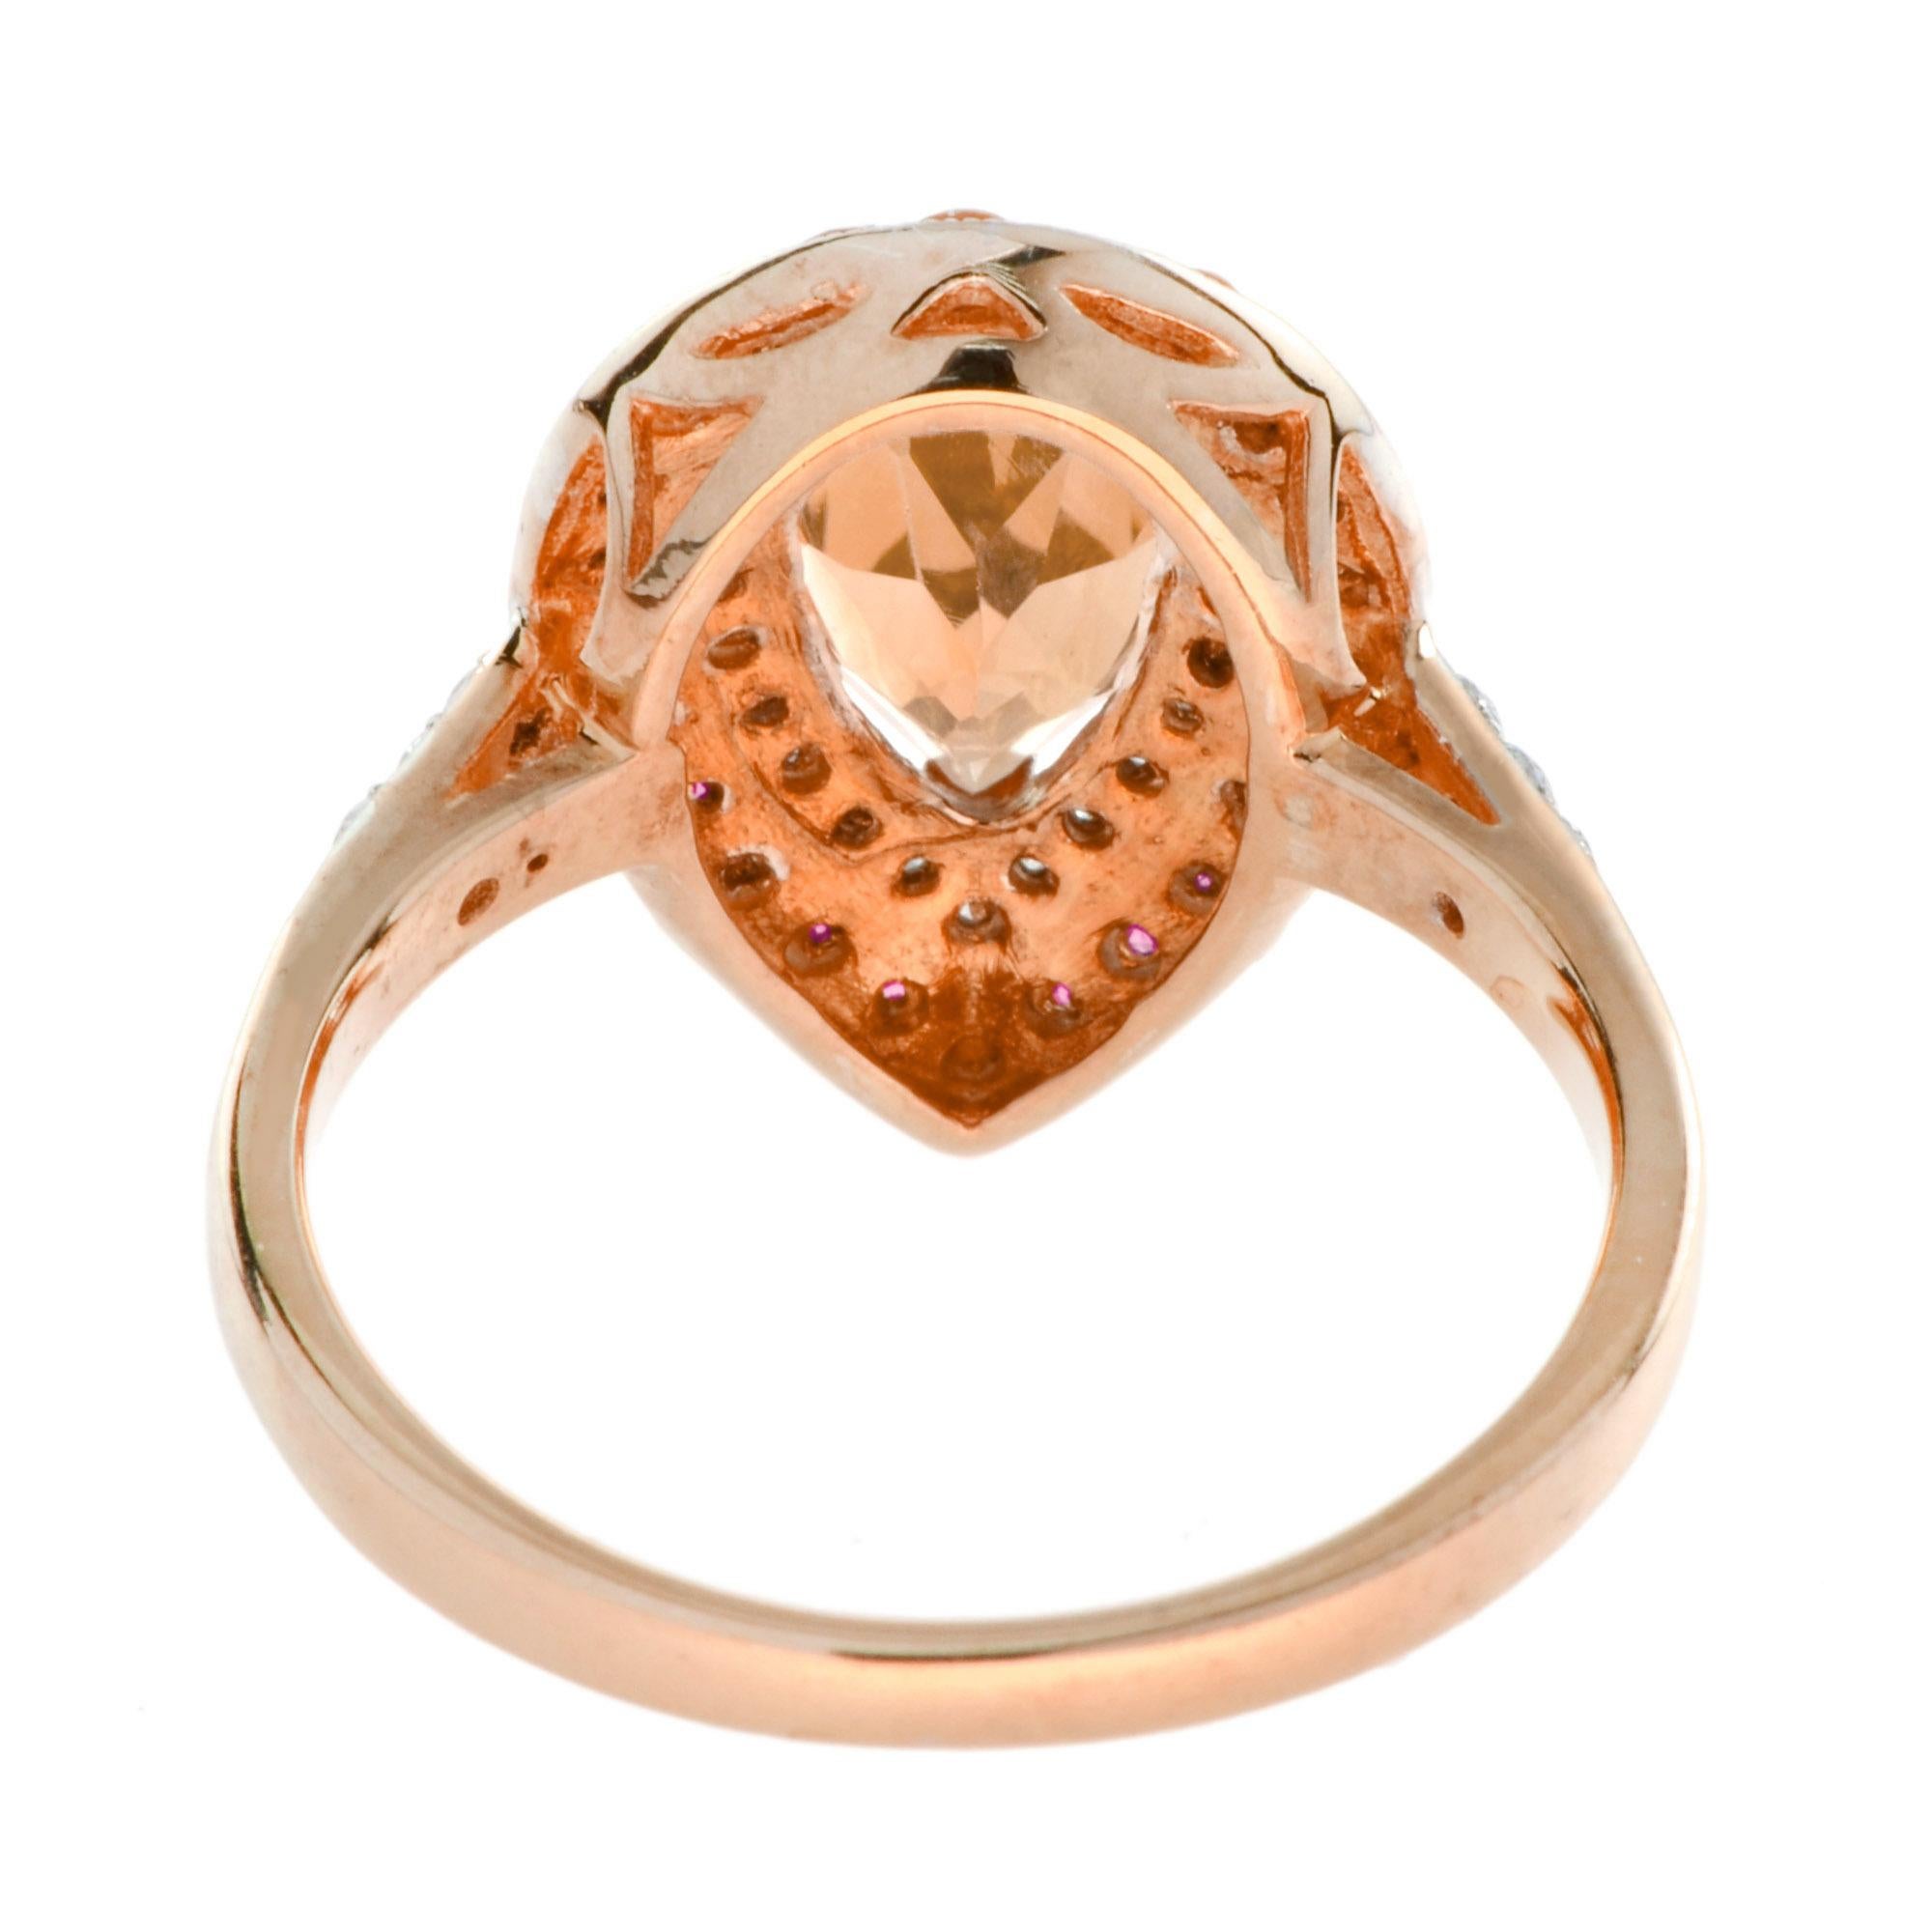 For Sale:  Morganite Diamond Ruby Pear Shaped Halo  Engagement Ring in 14K Rose Gold 5